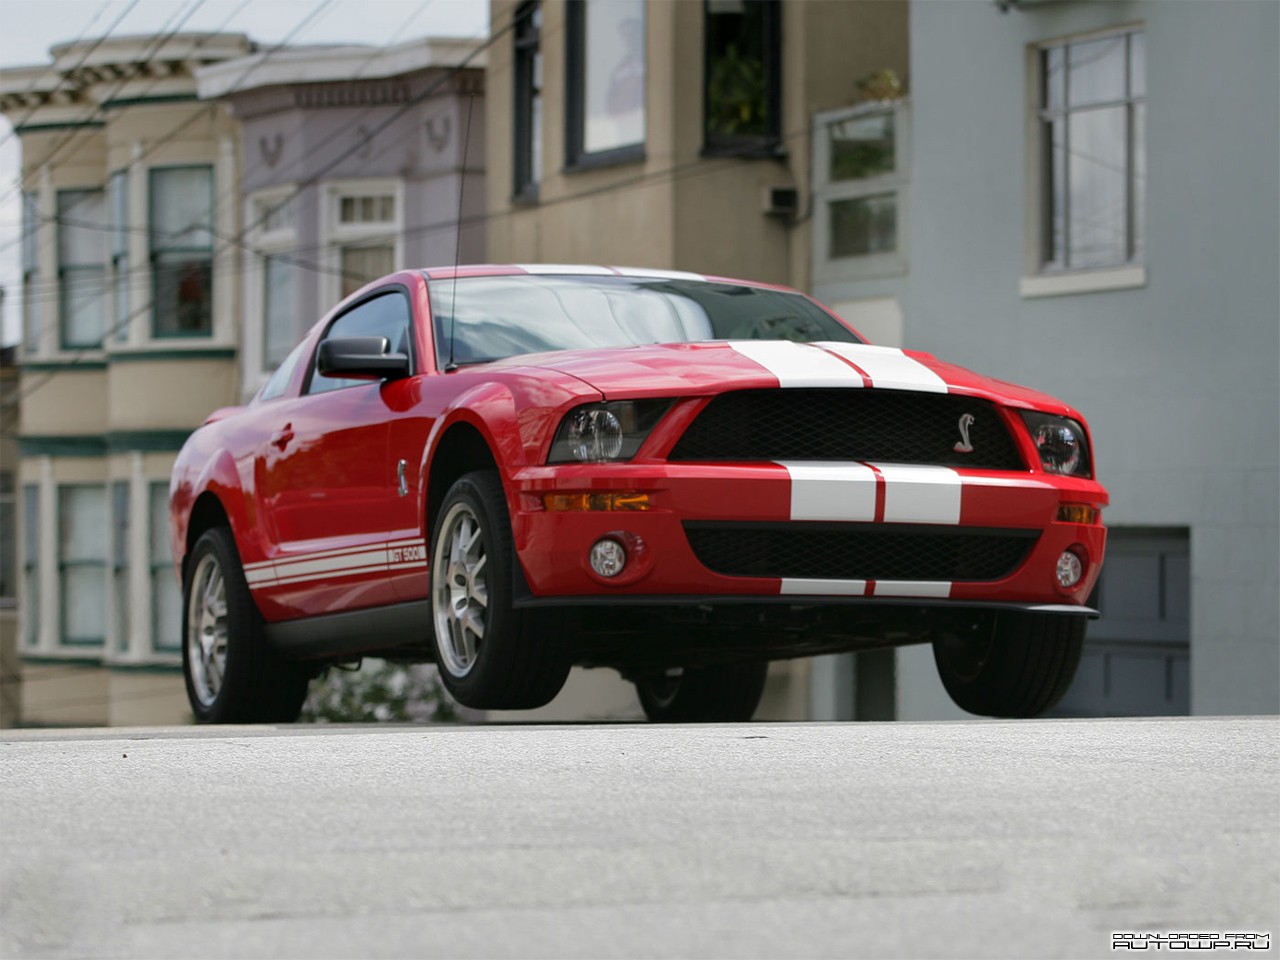 General 1280x960 car vehicle red cars Ford Ford Mustang muscle cars American cars Shelby Ford Mustang Shelby